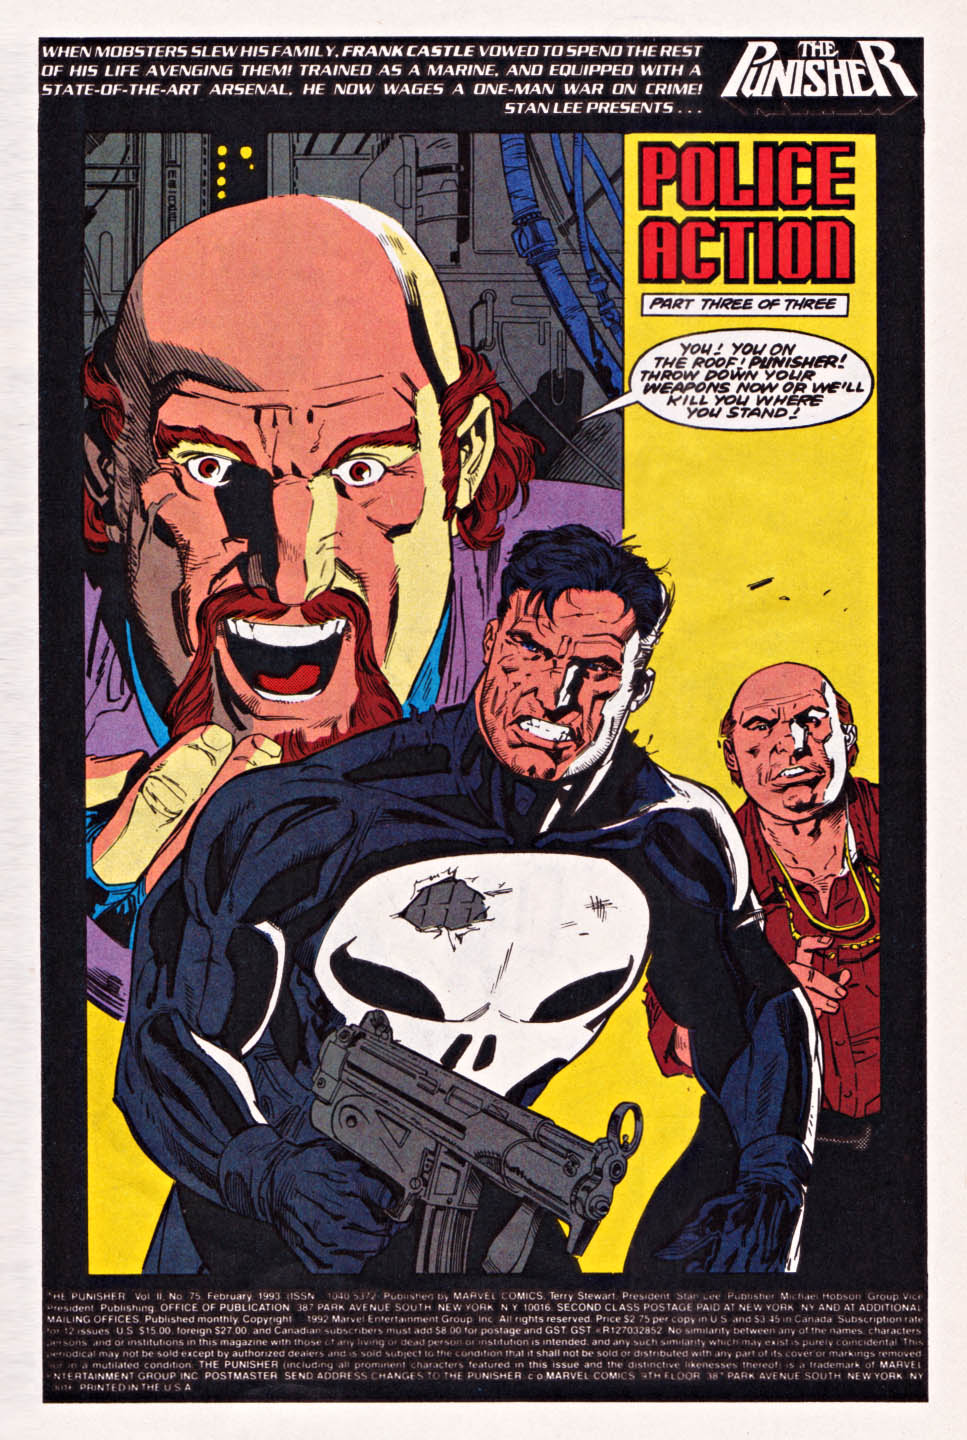 The Punisher (1987) Issue #75 - Police Action #03 #82 - English 2